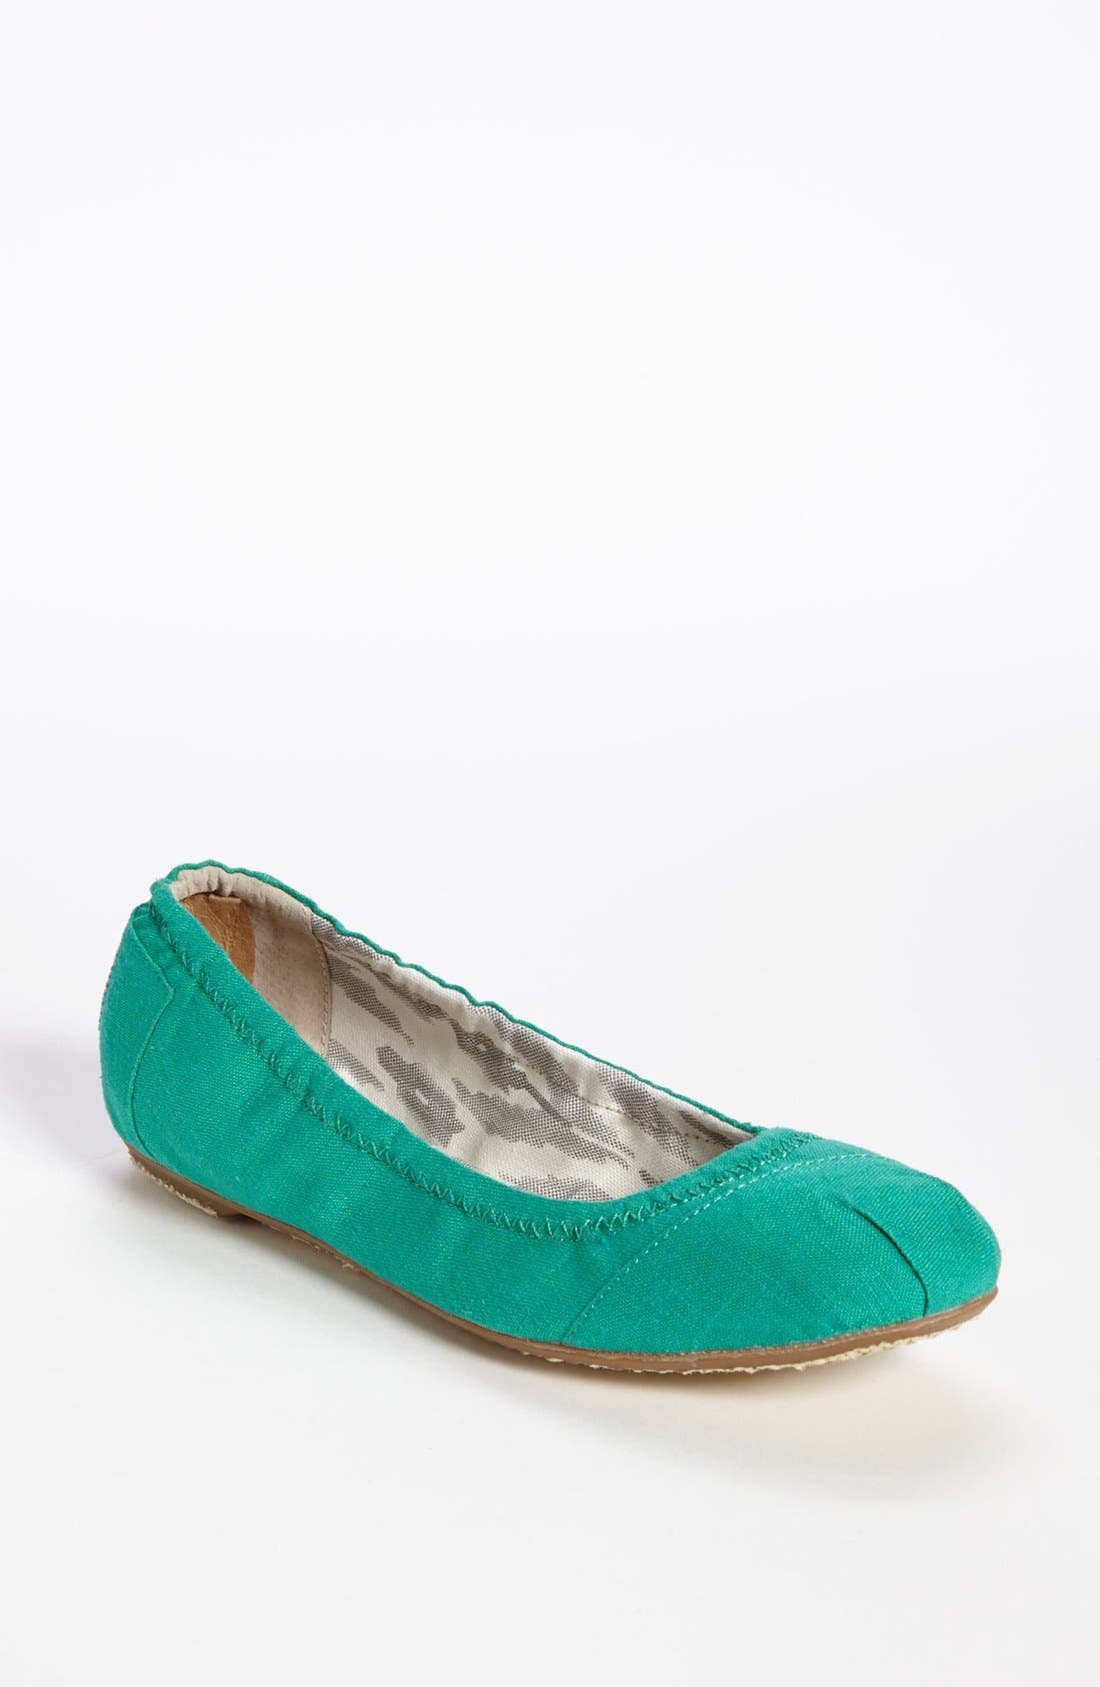 toms pointed toe flats